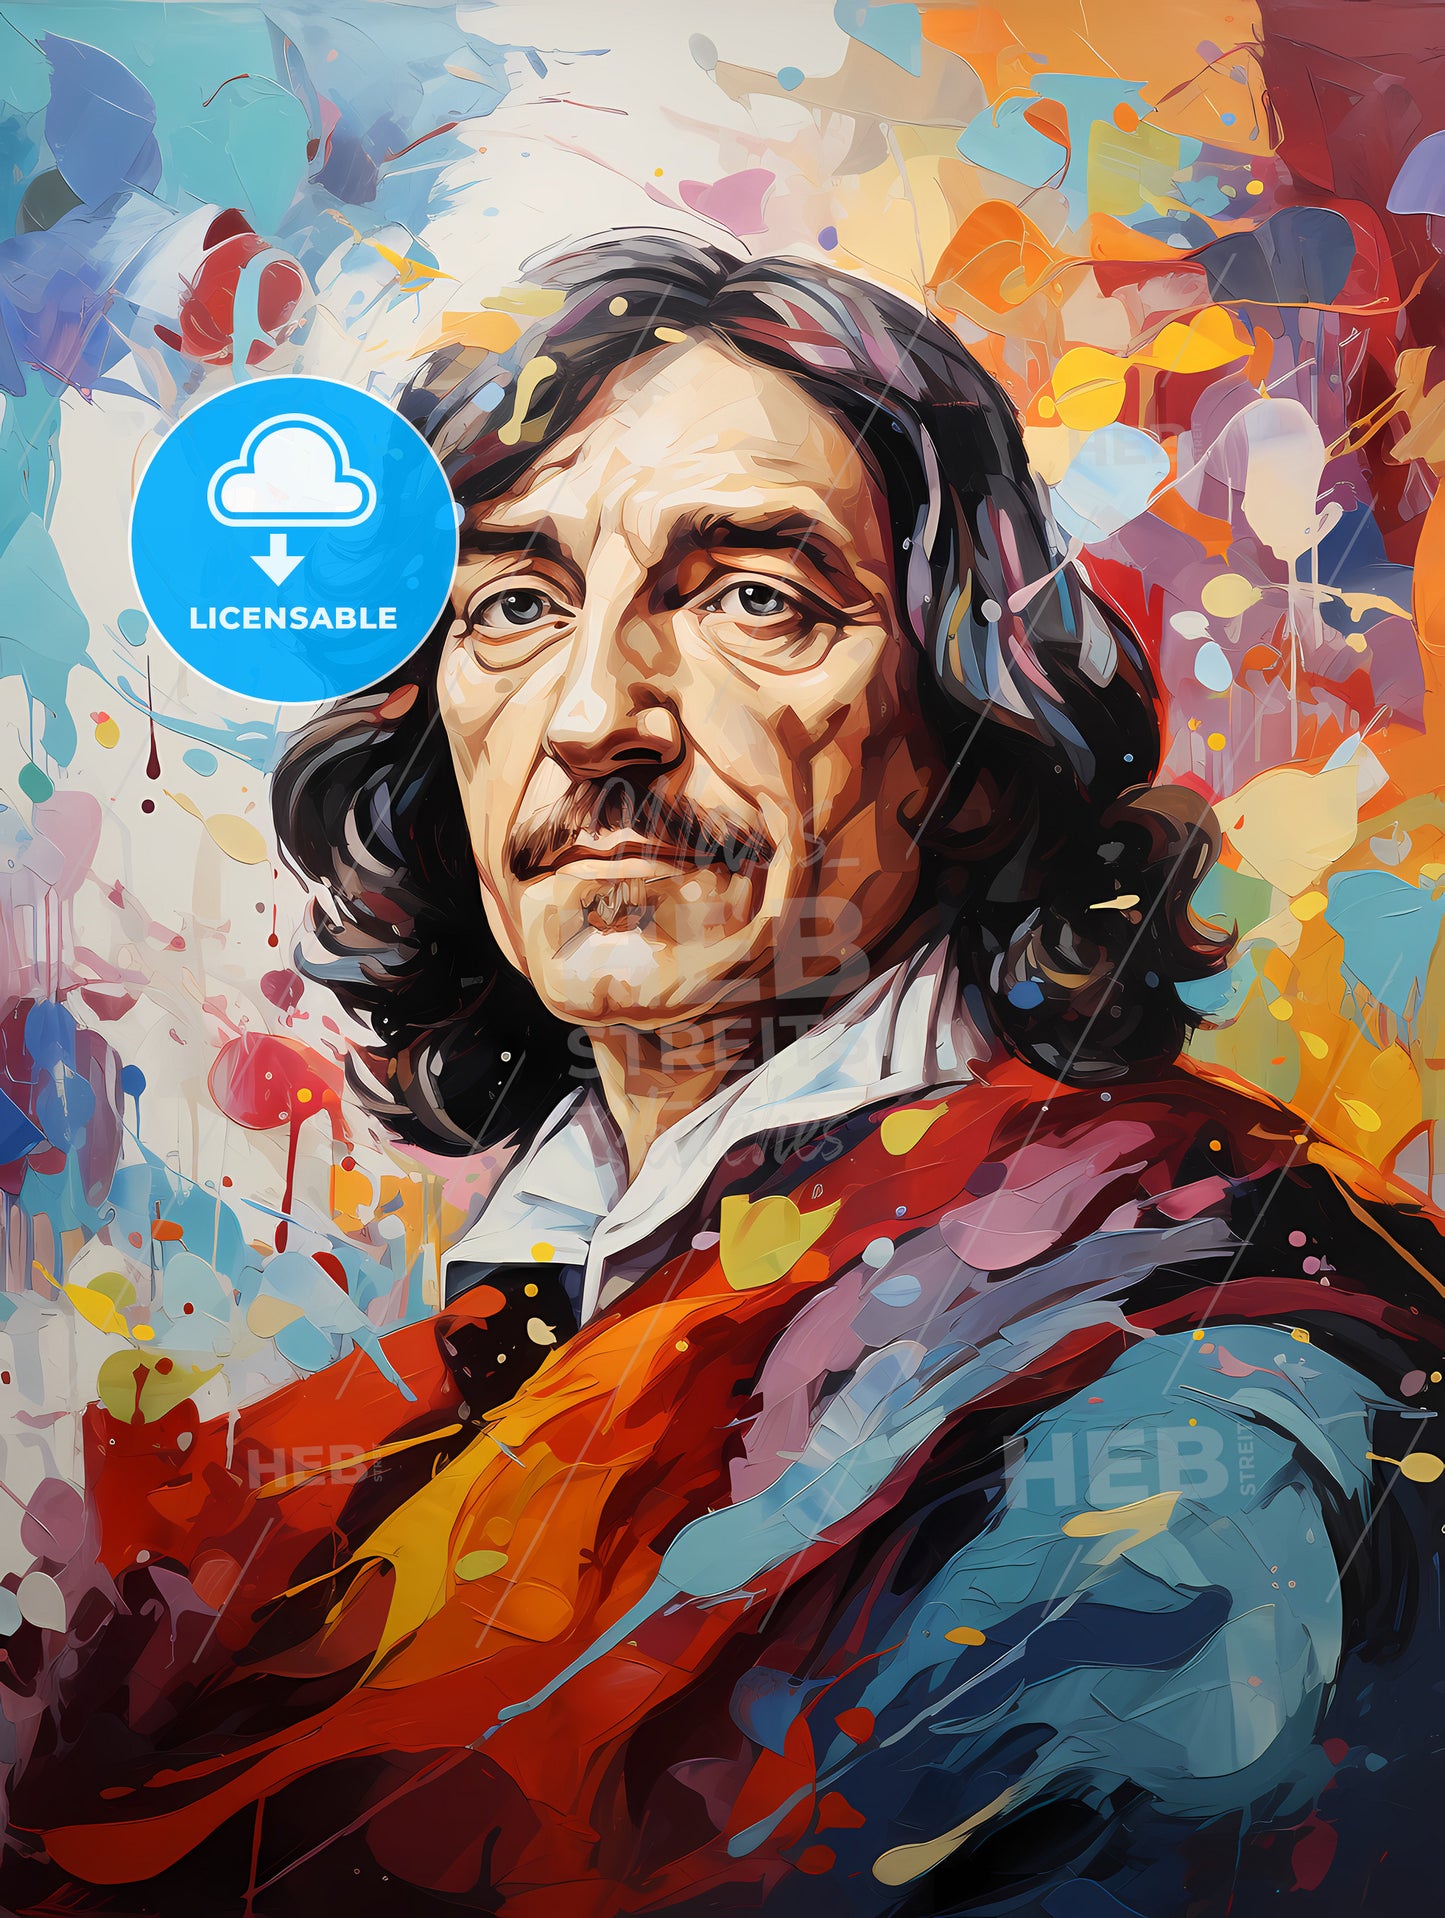 Rene Descartes - A Painting Of A Man With A Mustache